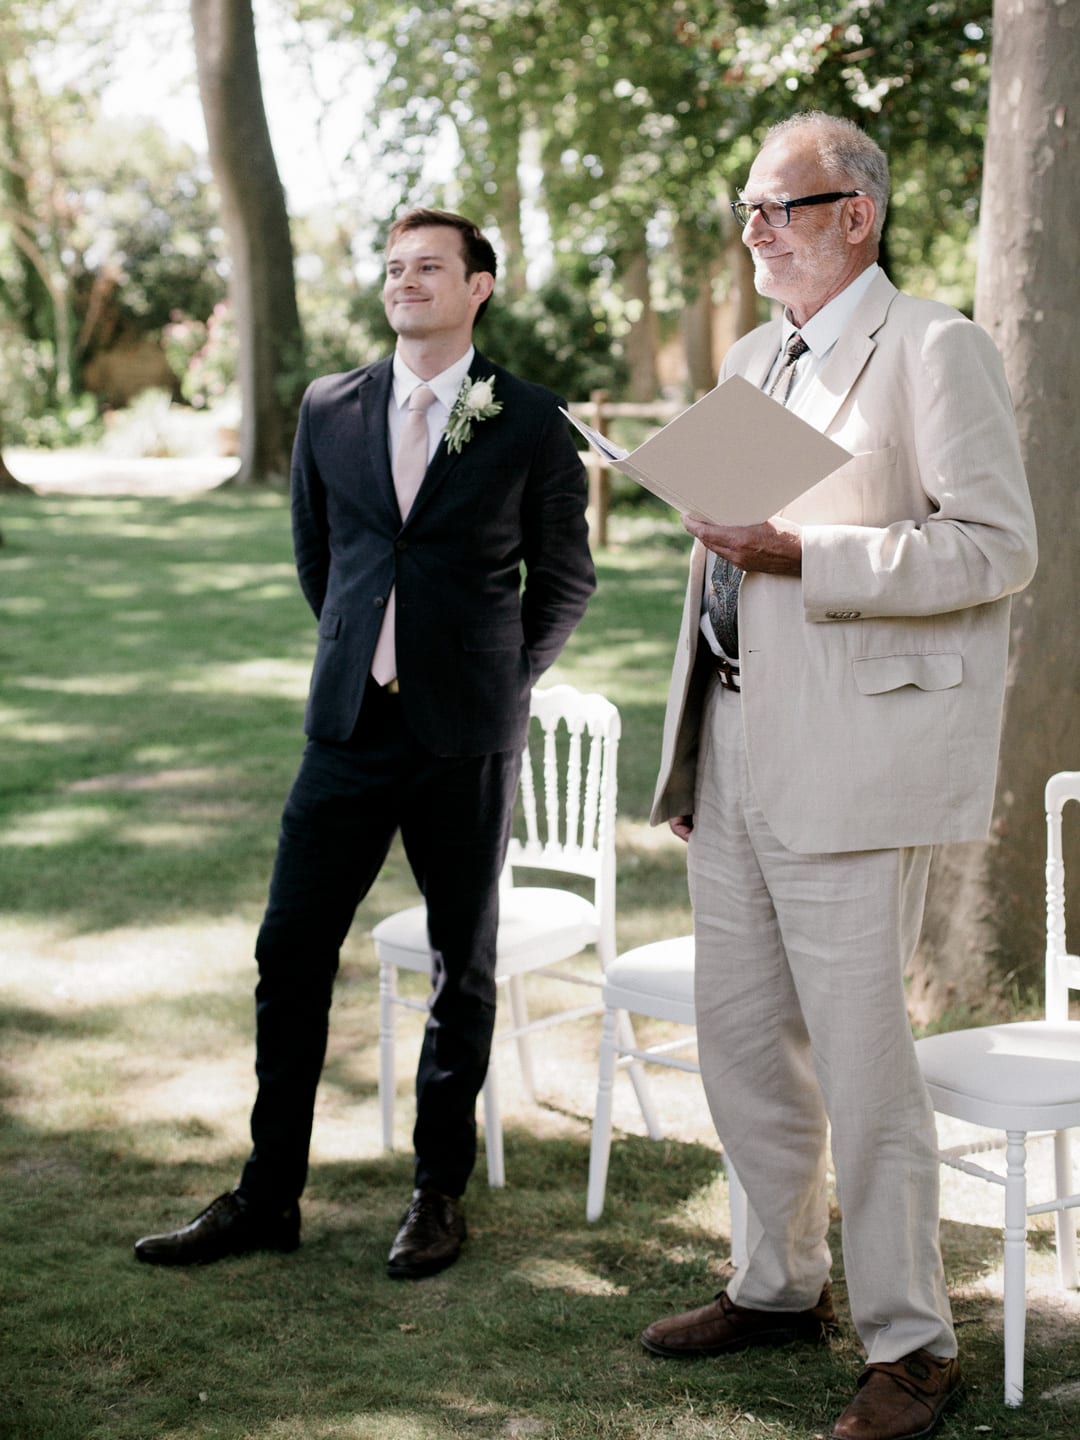 Dan in his wedding suit and the priest